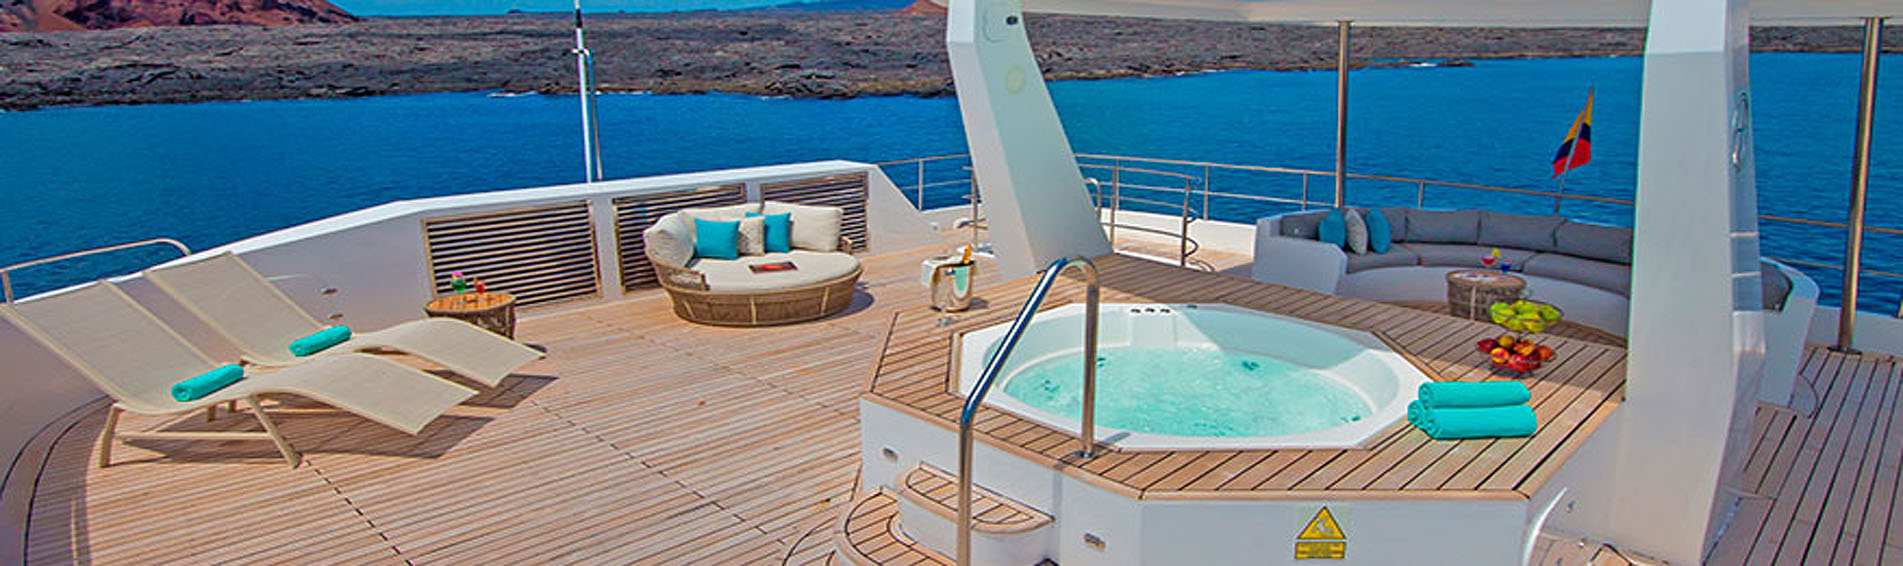 ALYA back deck spa and chairs Galapagos cruise